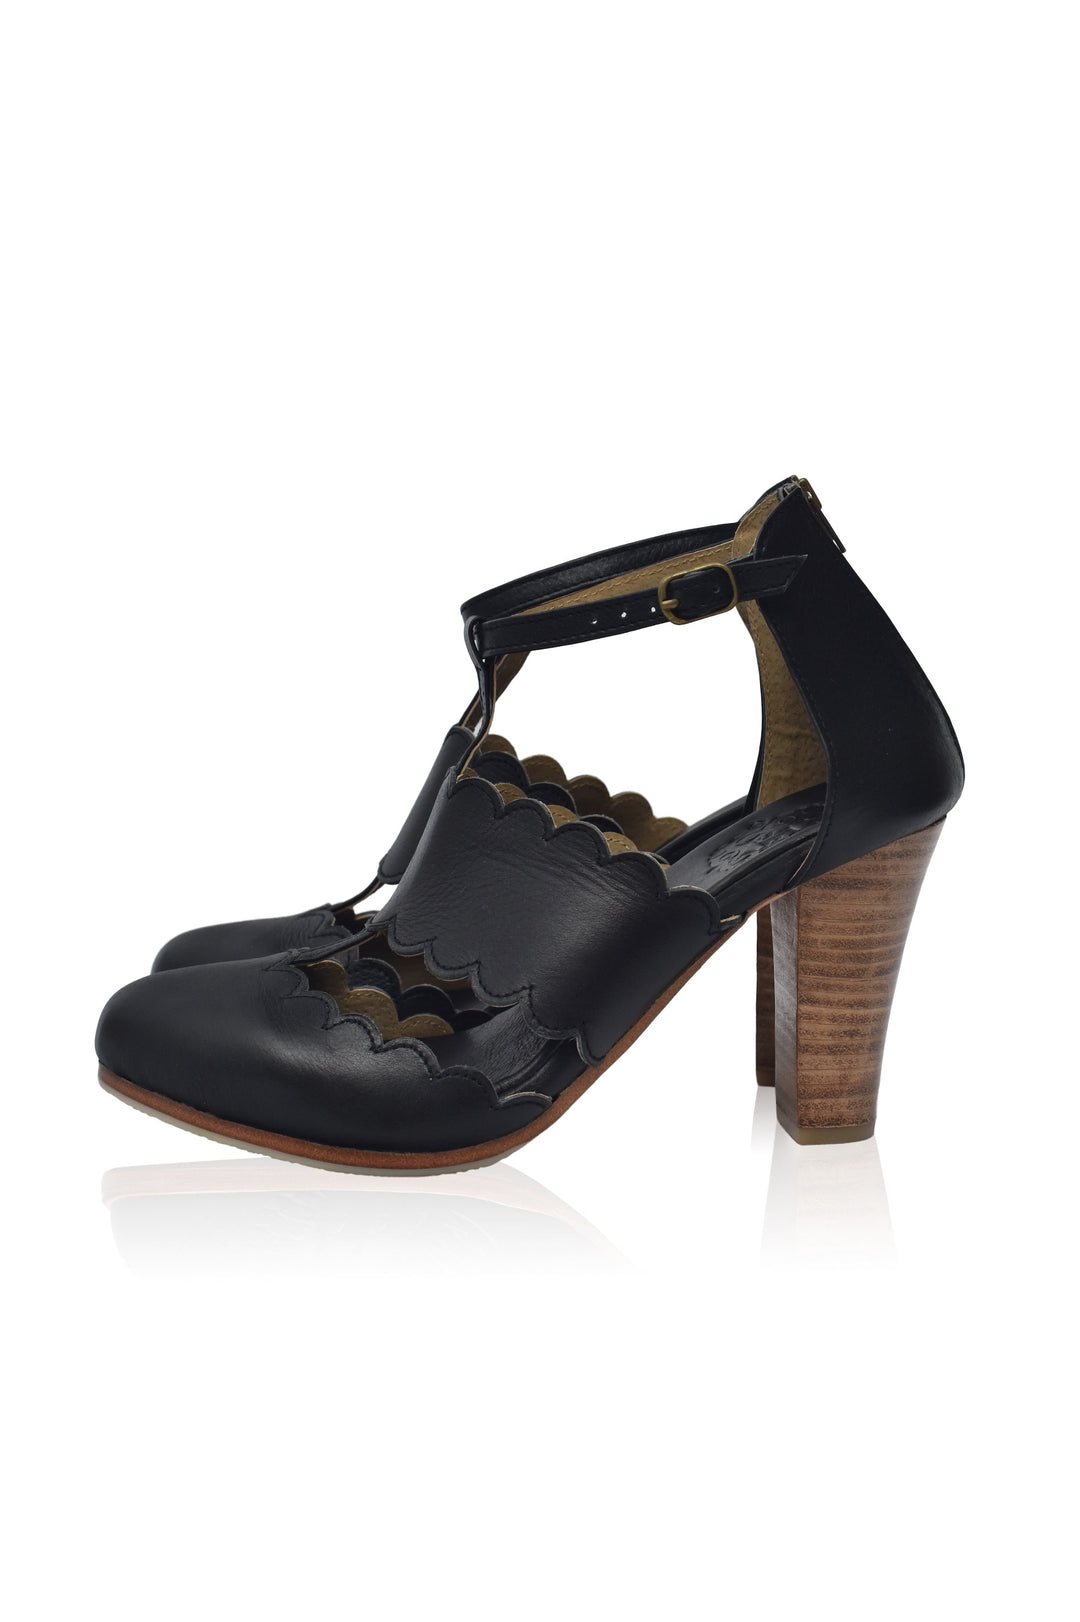 Incognito Leather Heels by ELF